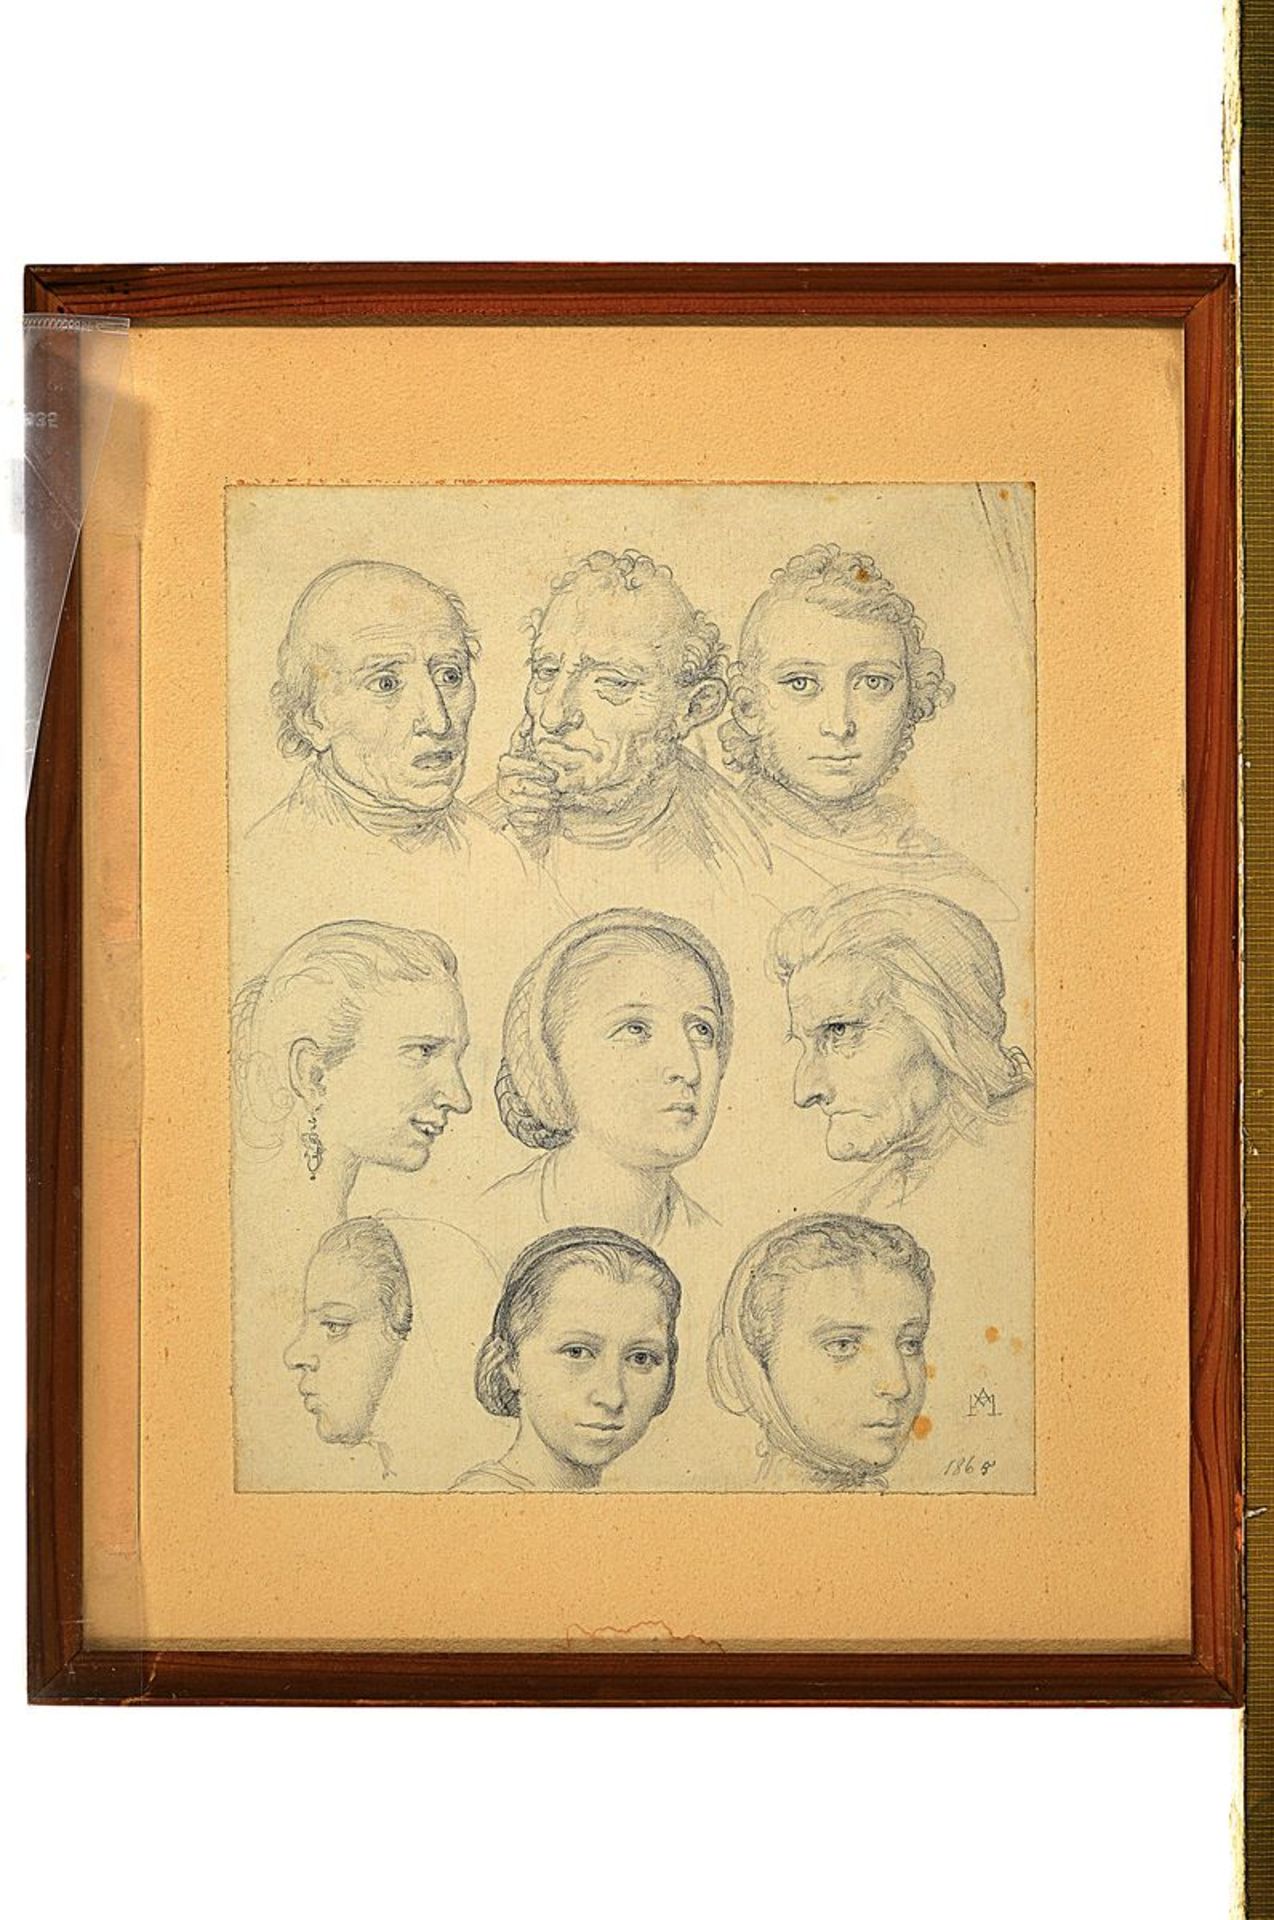 Andreas Müller, 1831-1901, student of Schraudolph, here: two sketch sheets with head studies, pencil - Bild 2 aus 2